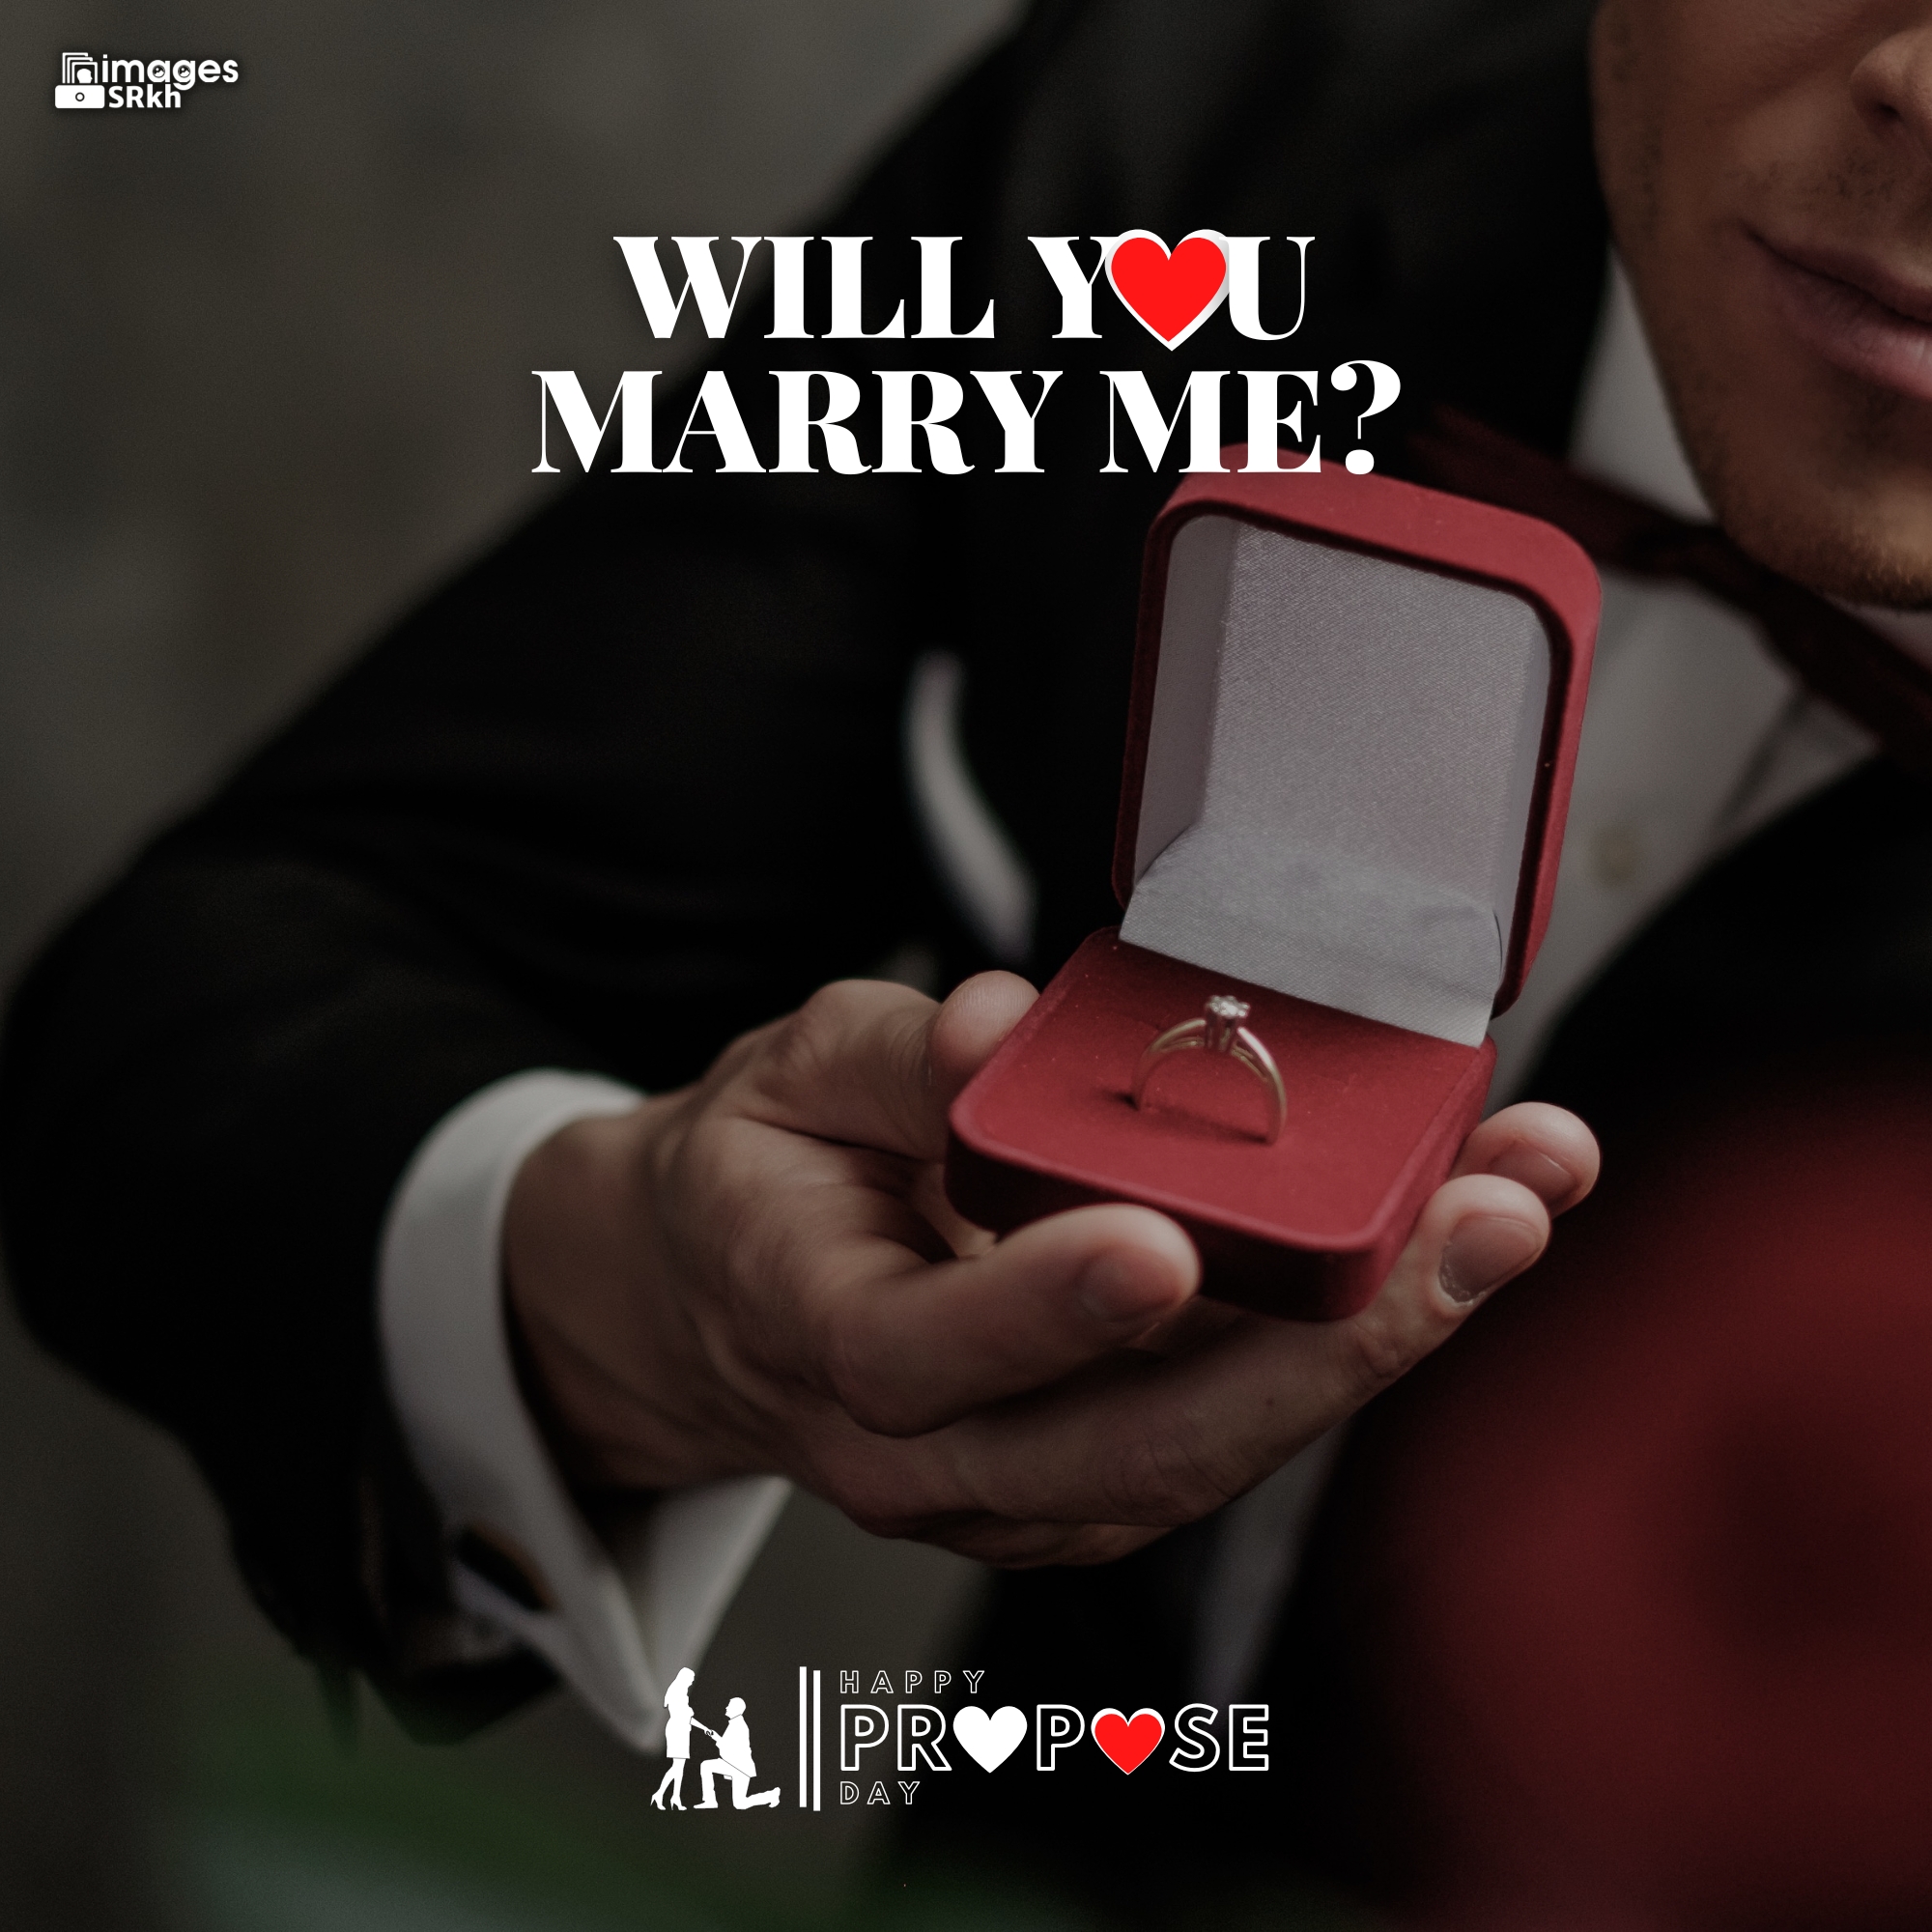 Propose Day Images | 255 | Will You MARRY ME